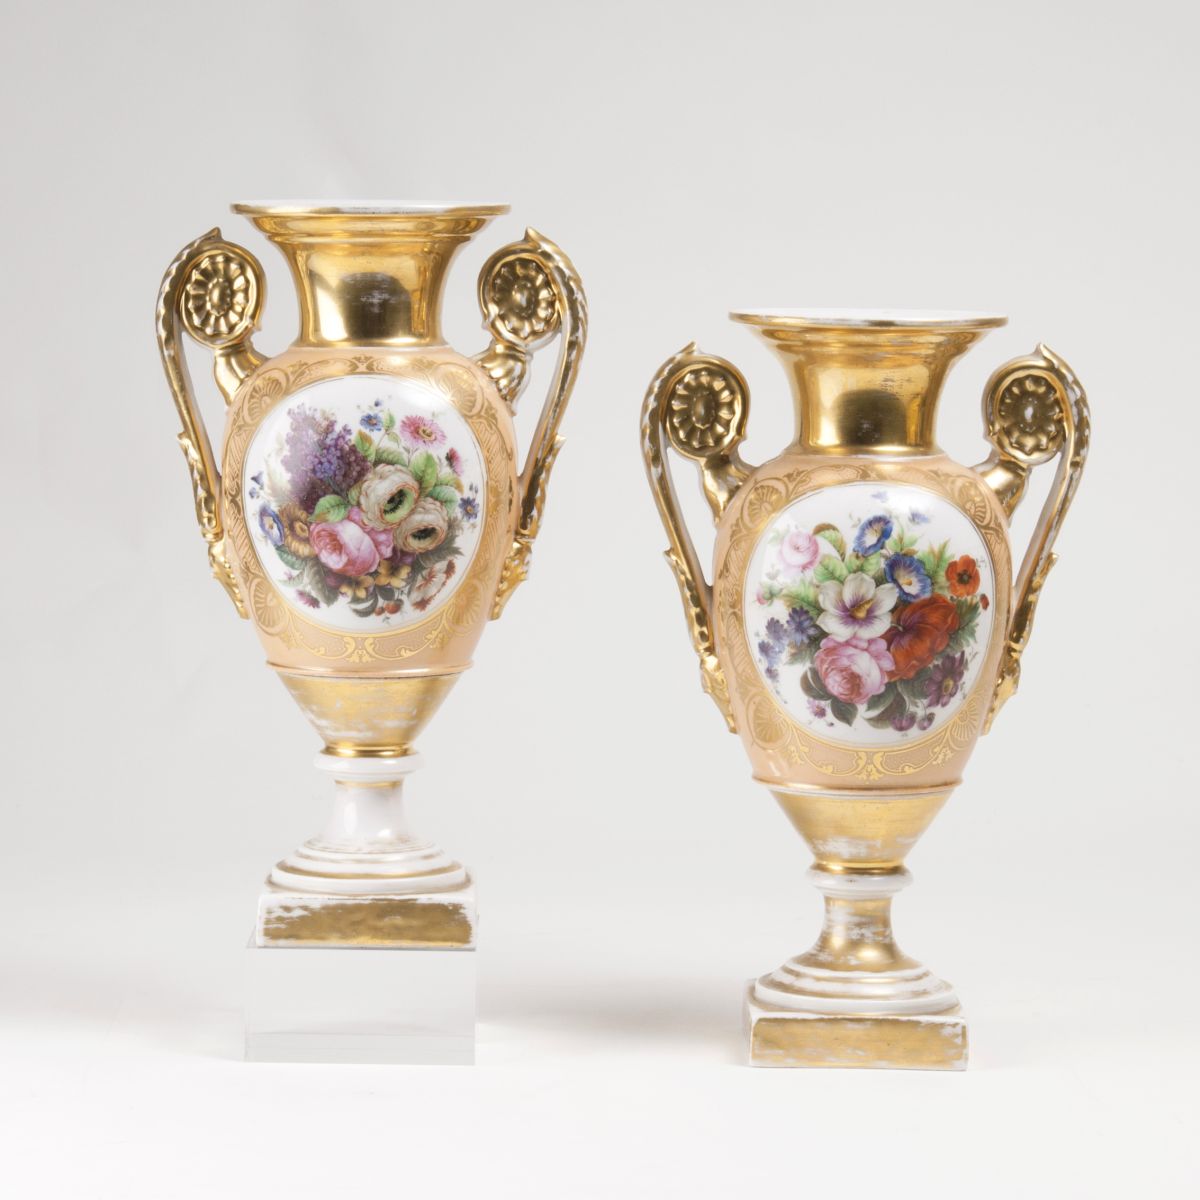 A Pair of Amphora Vases with Figural Scenes - image 2